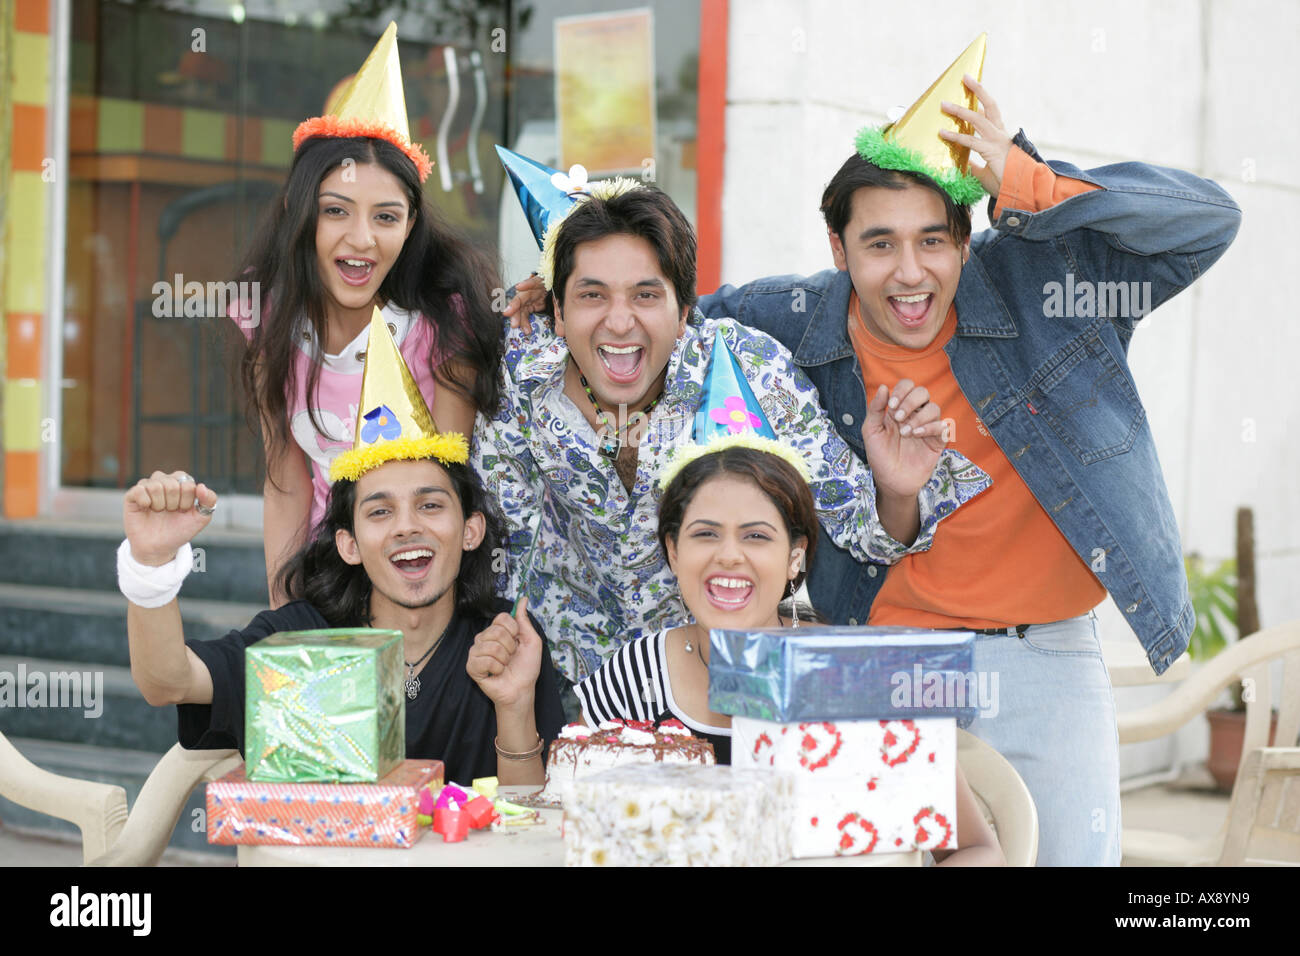 Portrait of teenage friends celebrating birthday party at a restaurant Stock Photo